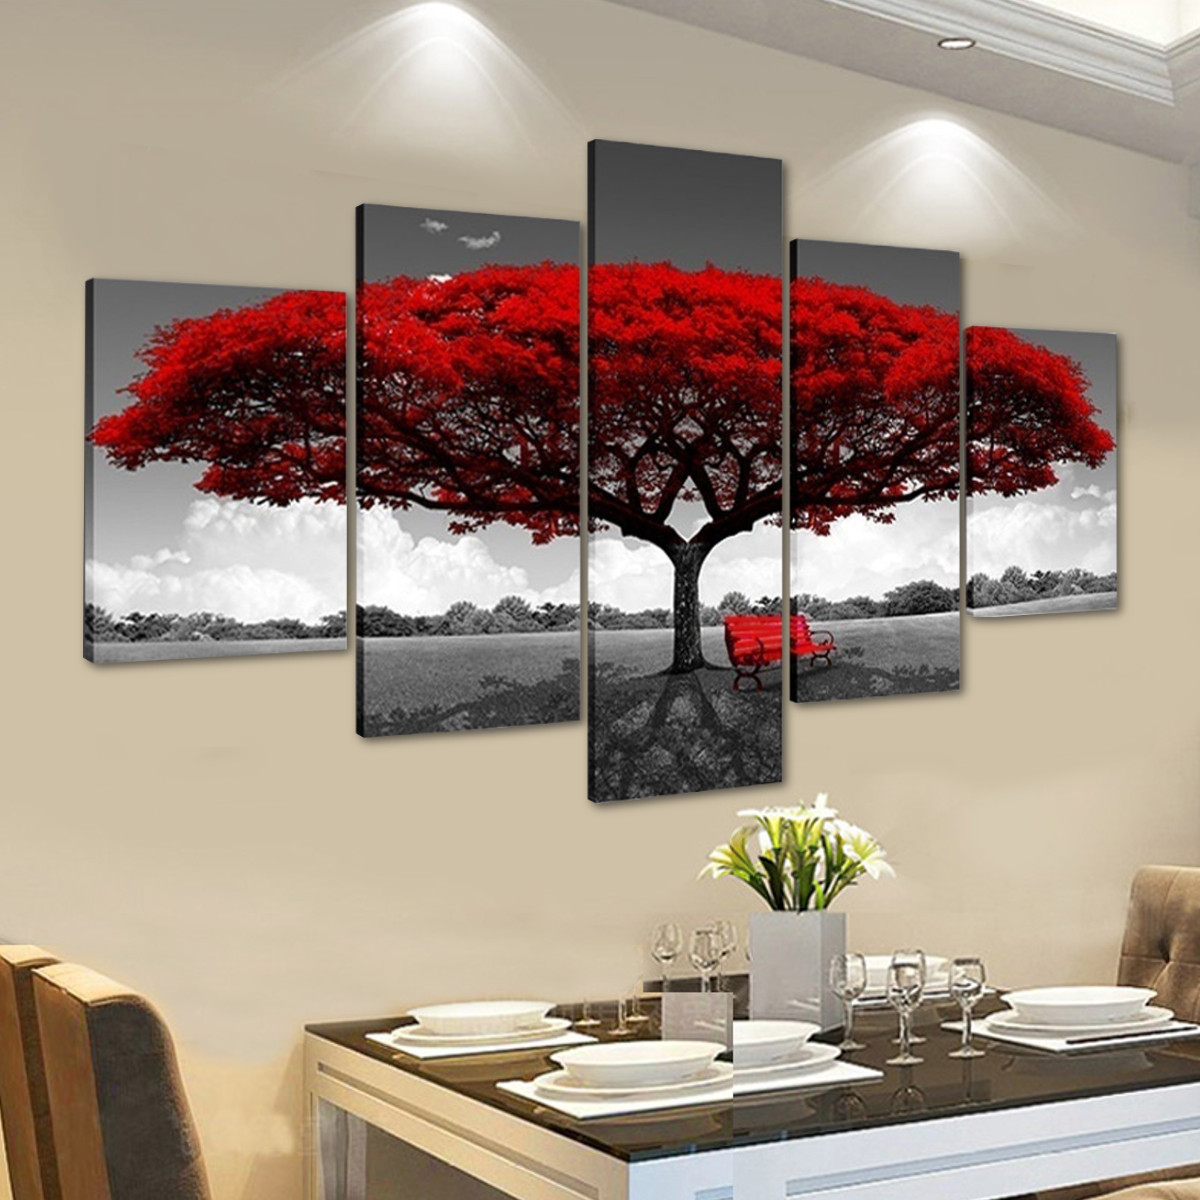 5Pcs-Red-Tree-Canvas-Paintings-Wall-Decorative-Print-Art-Pictures-Unframed-Wall-Hanging-Home-Office--1774551-8